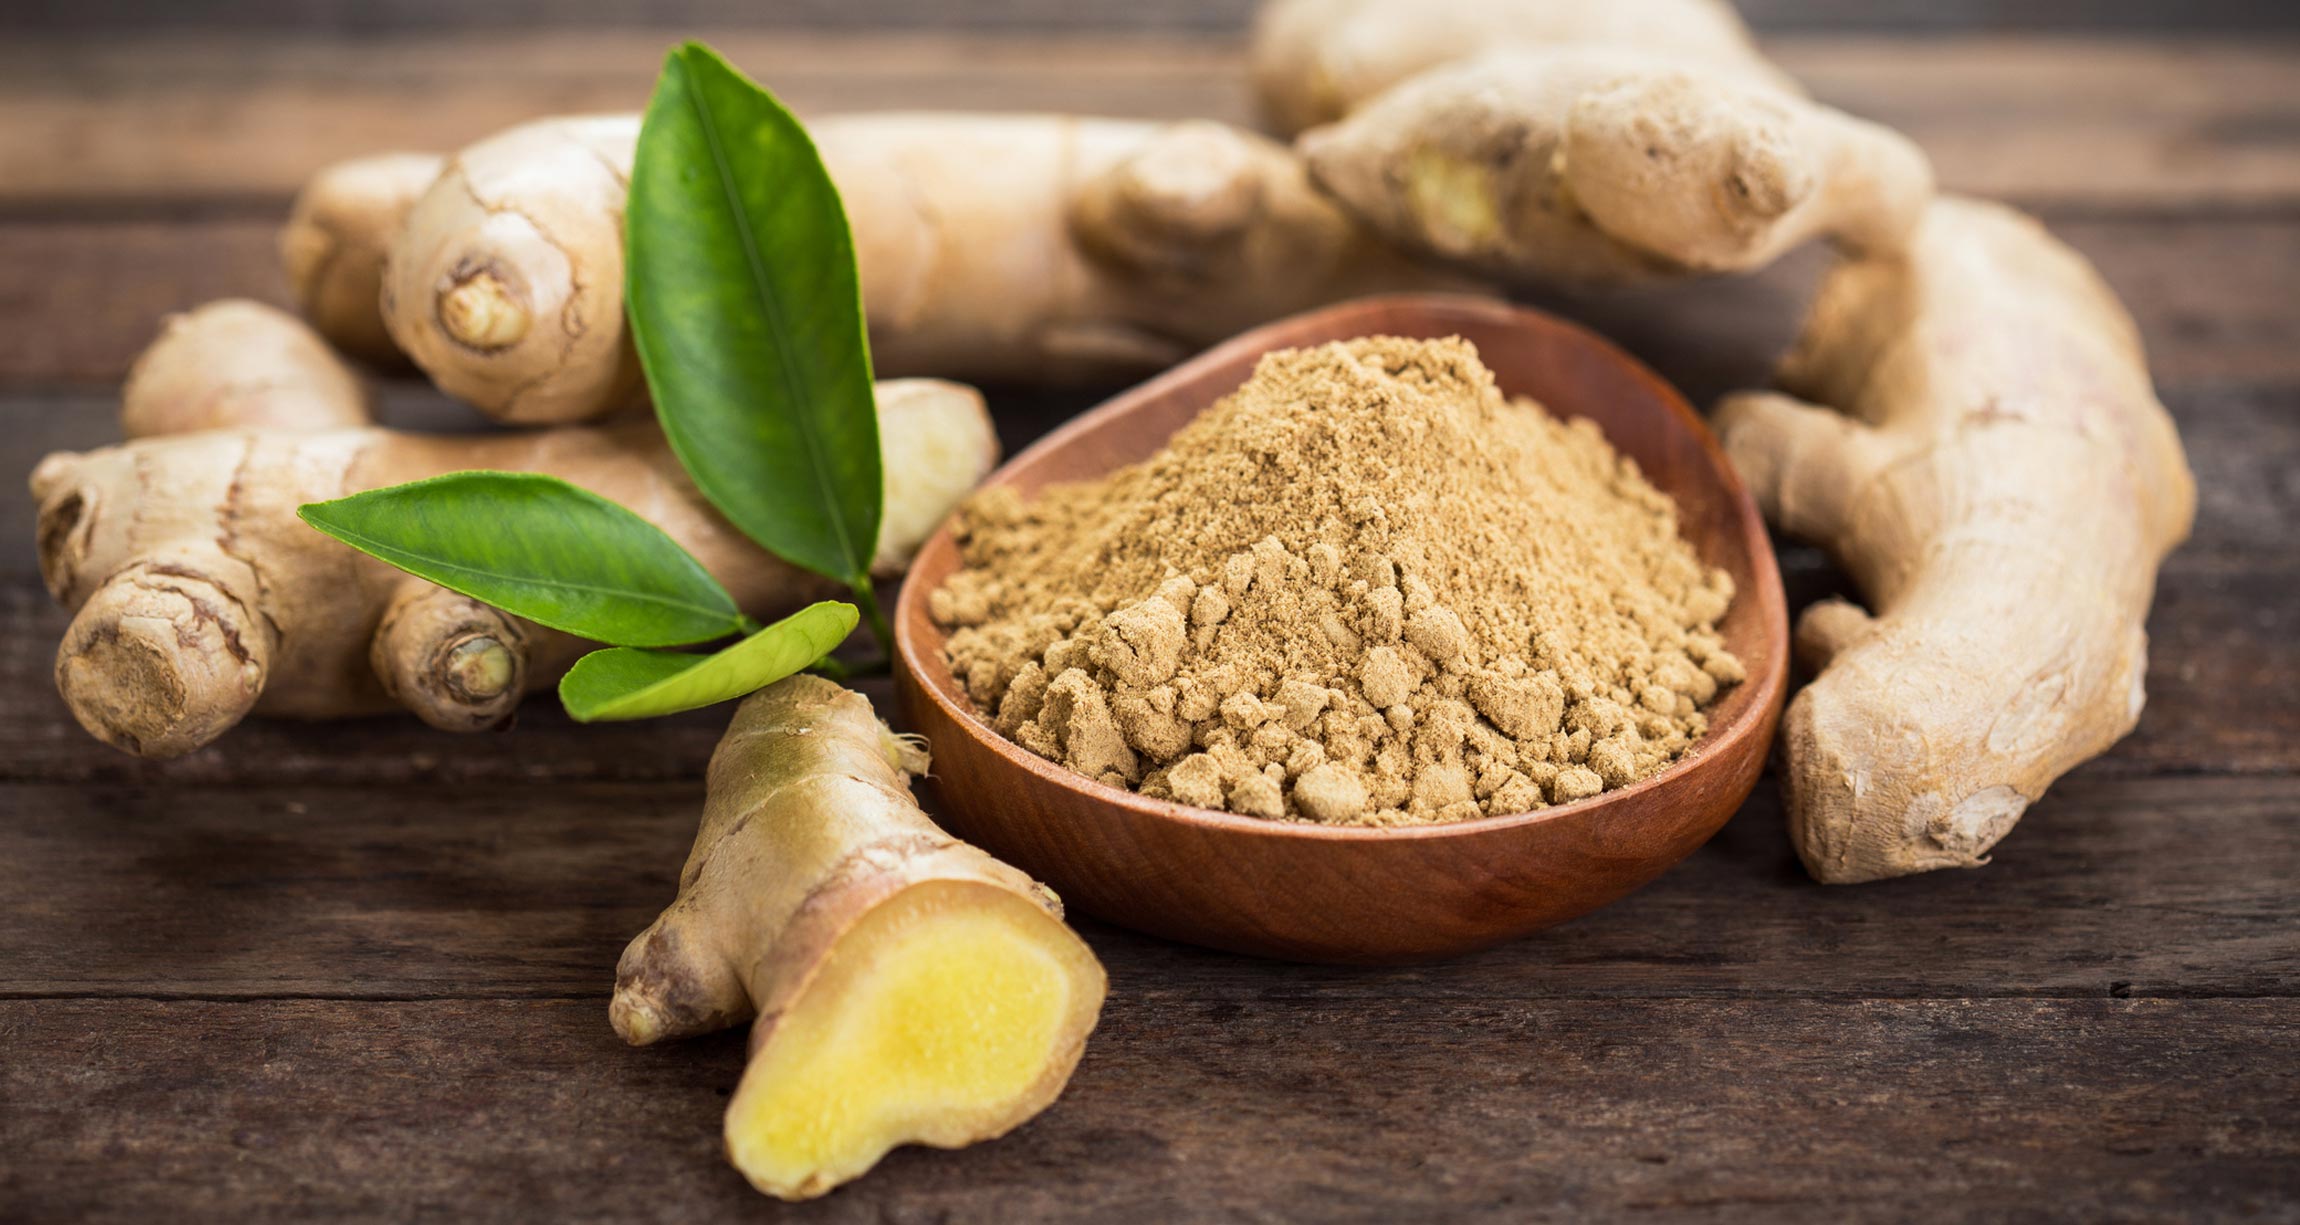 Benefits Of Ginger For Health